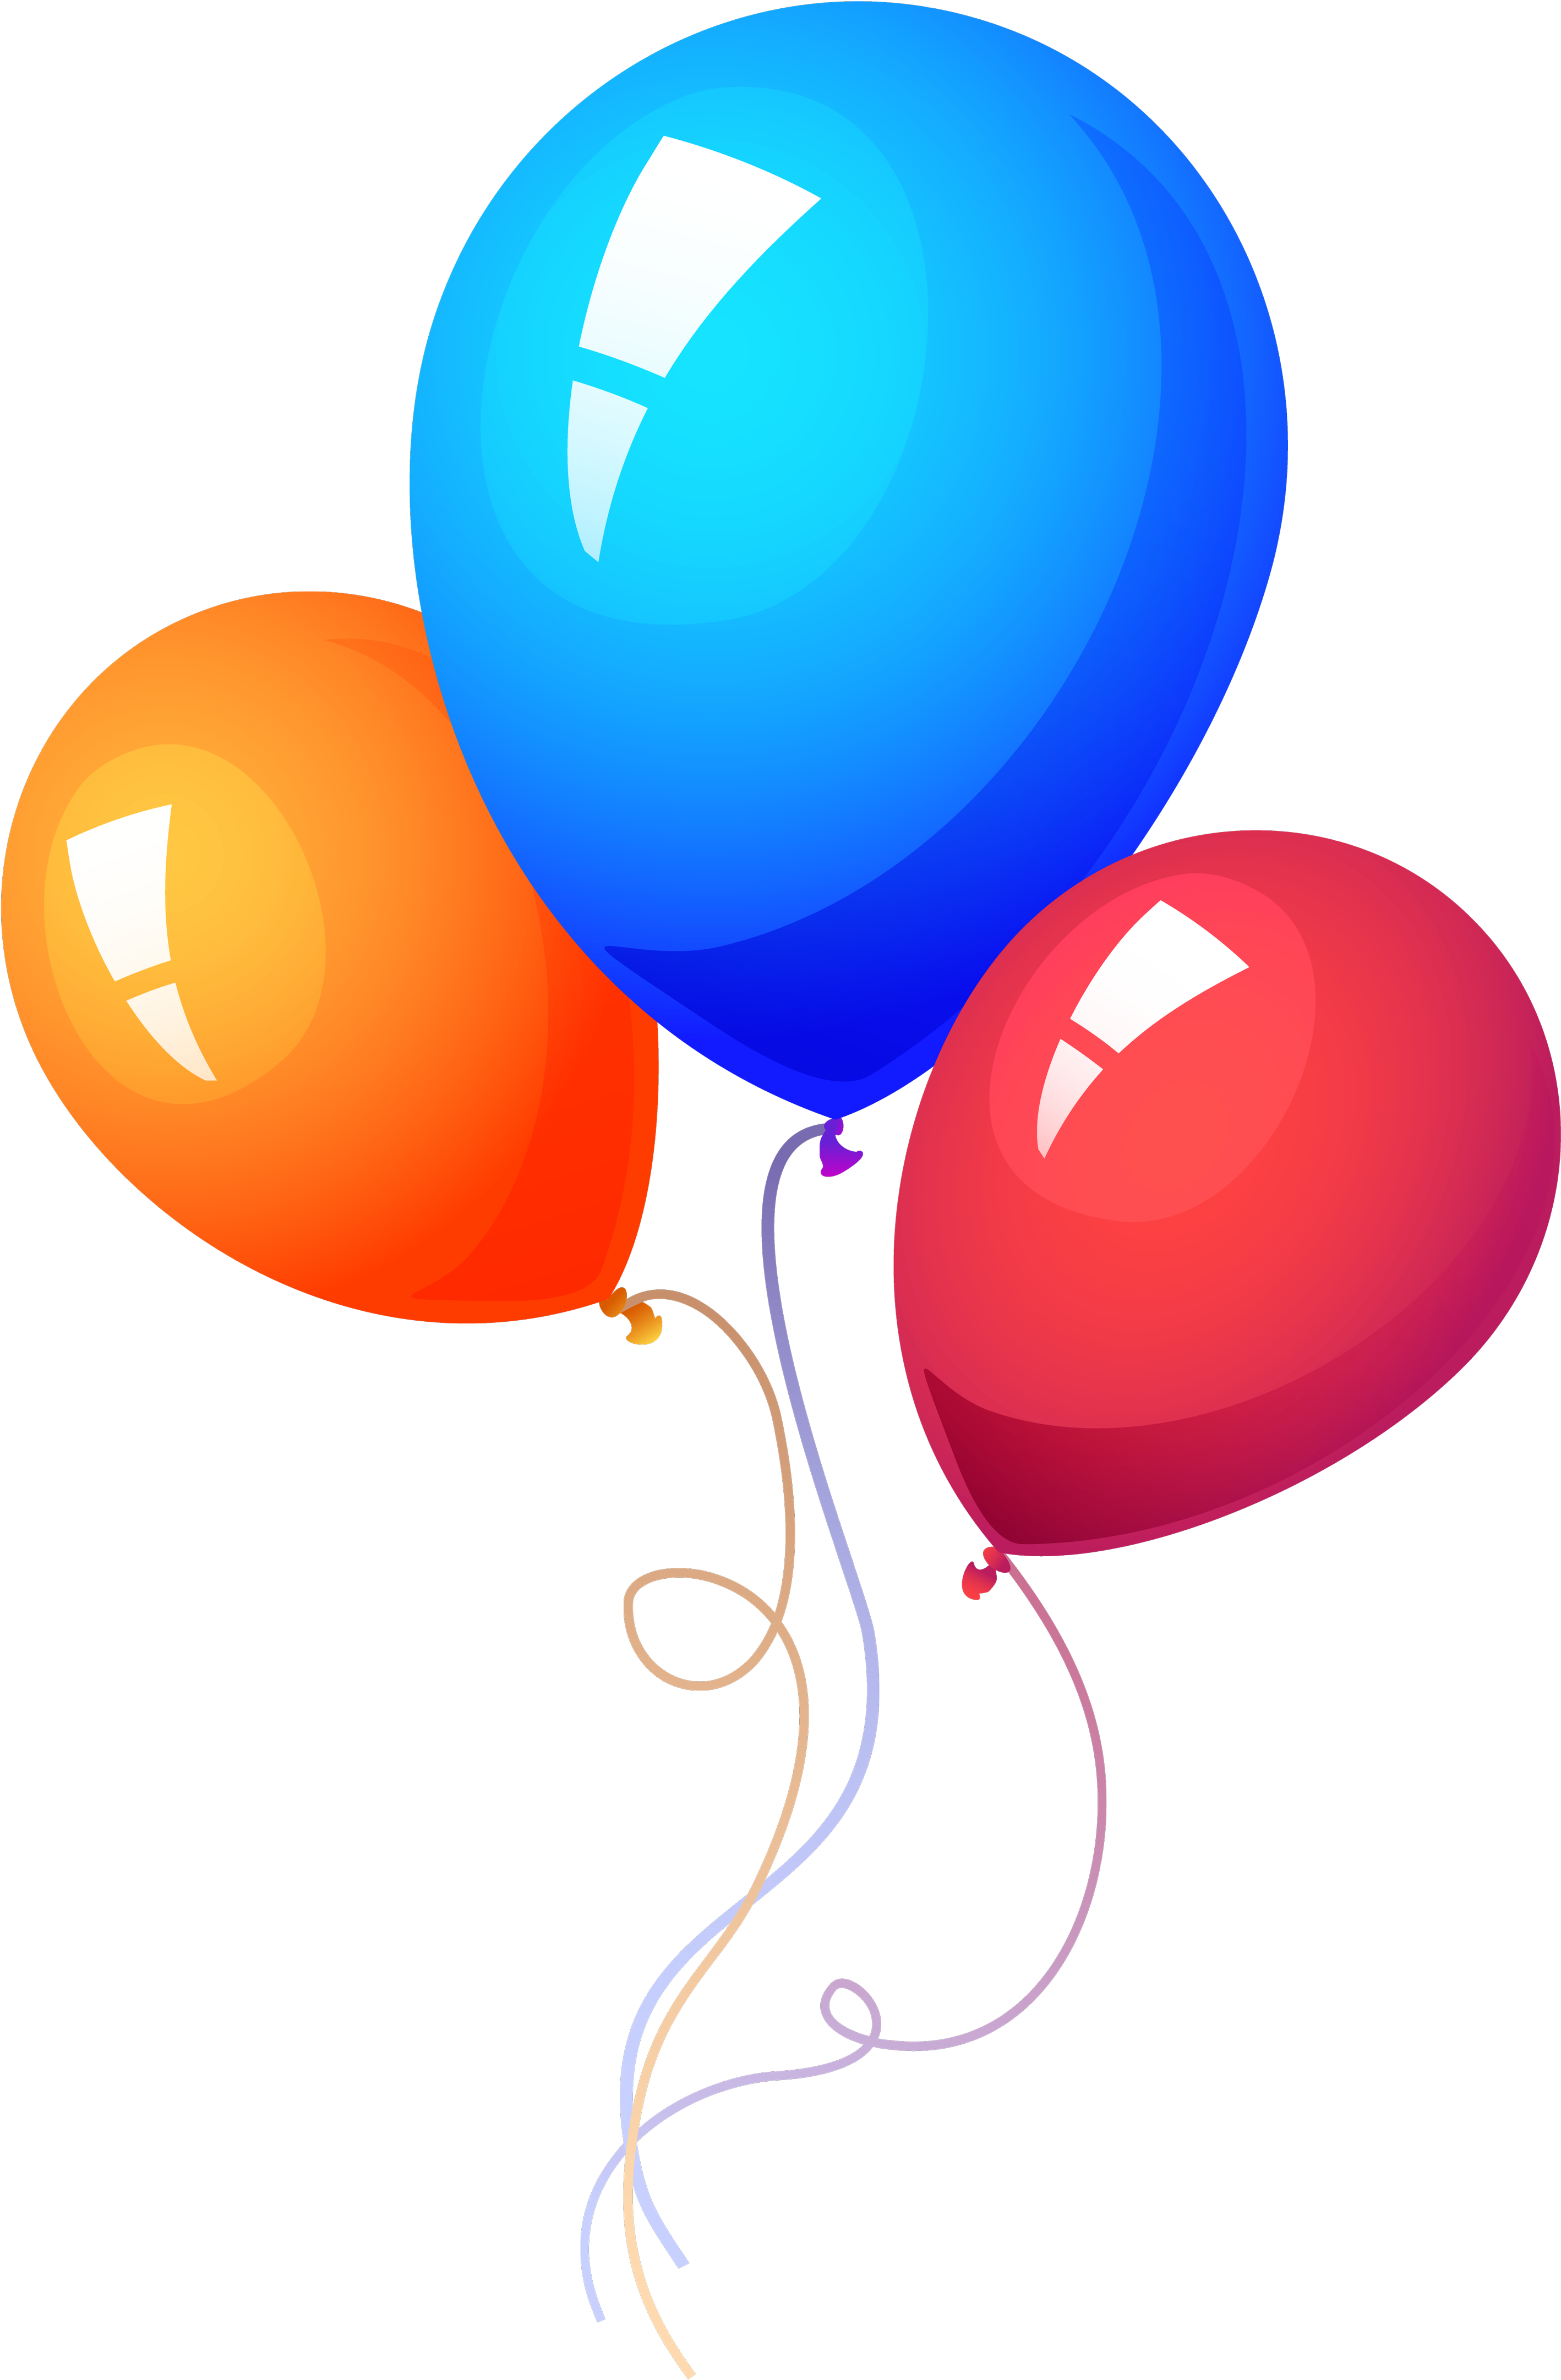 Colorful Birthday Balloons Graphic